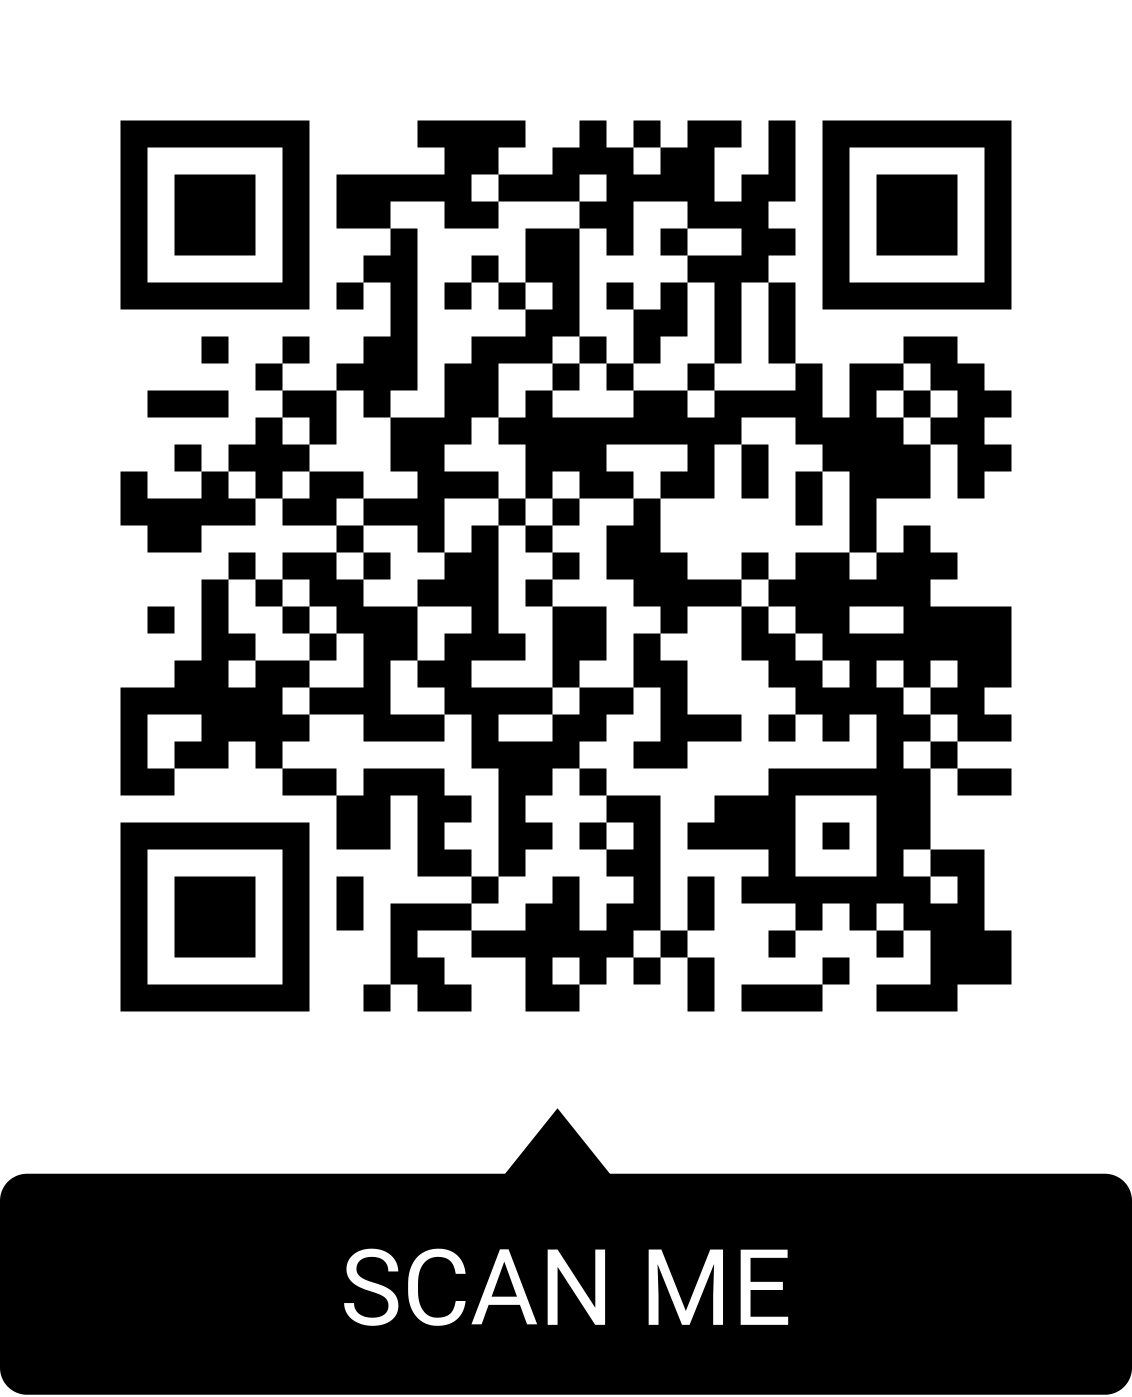 QR code that scans to mobile app store for apple and android devices to download the wesbanco consumer mobile app